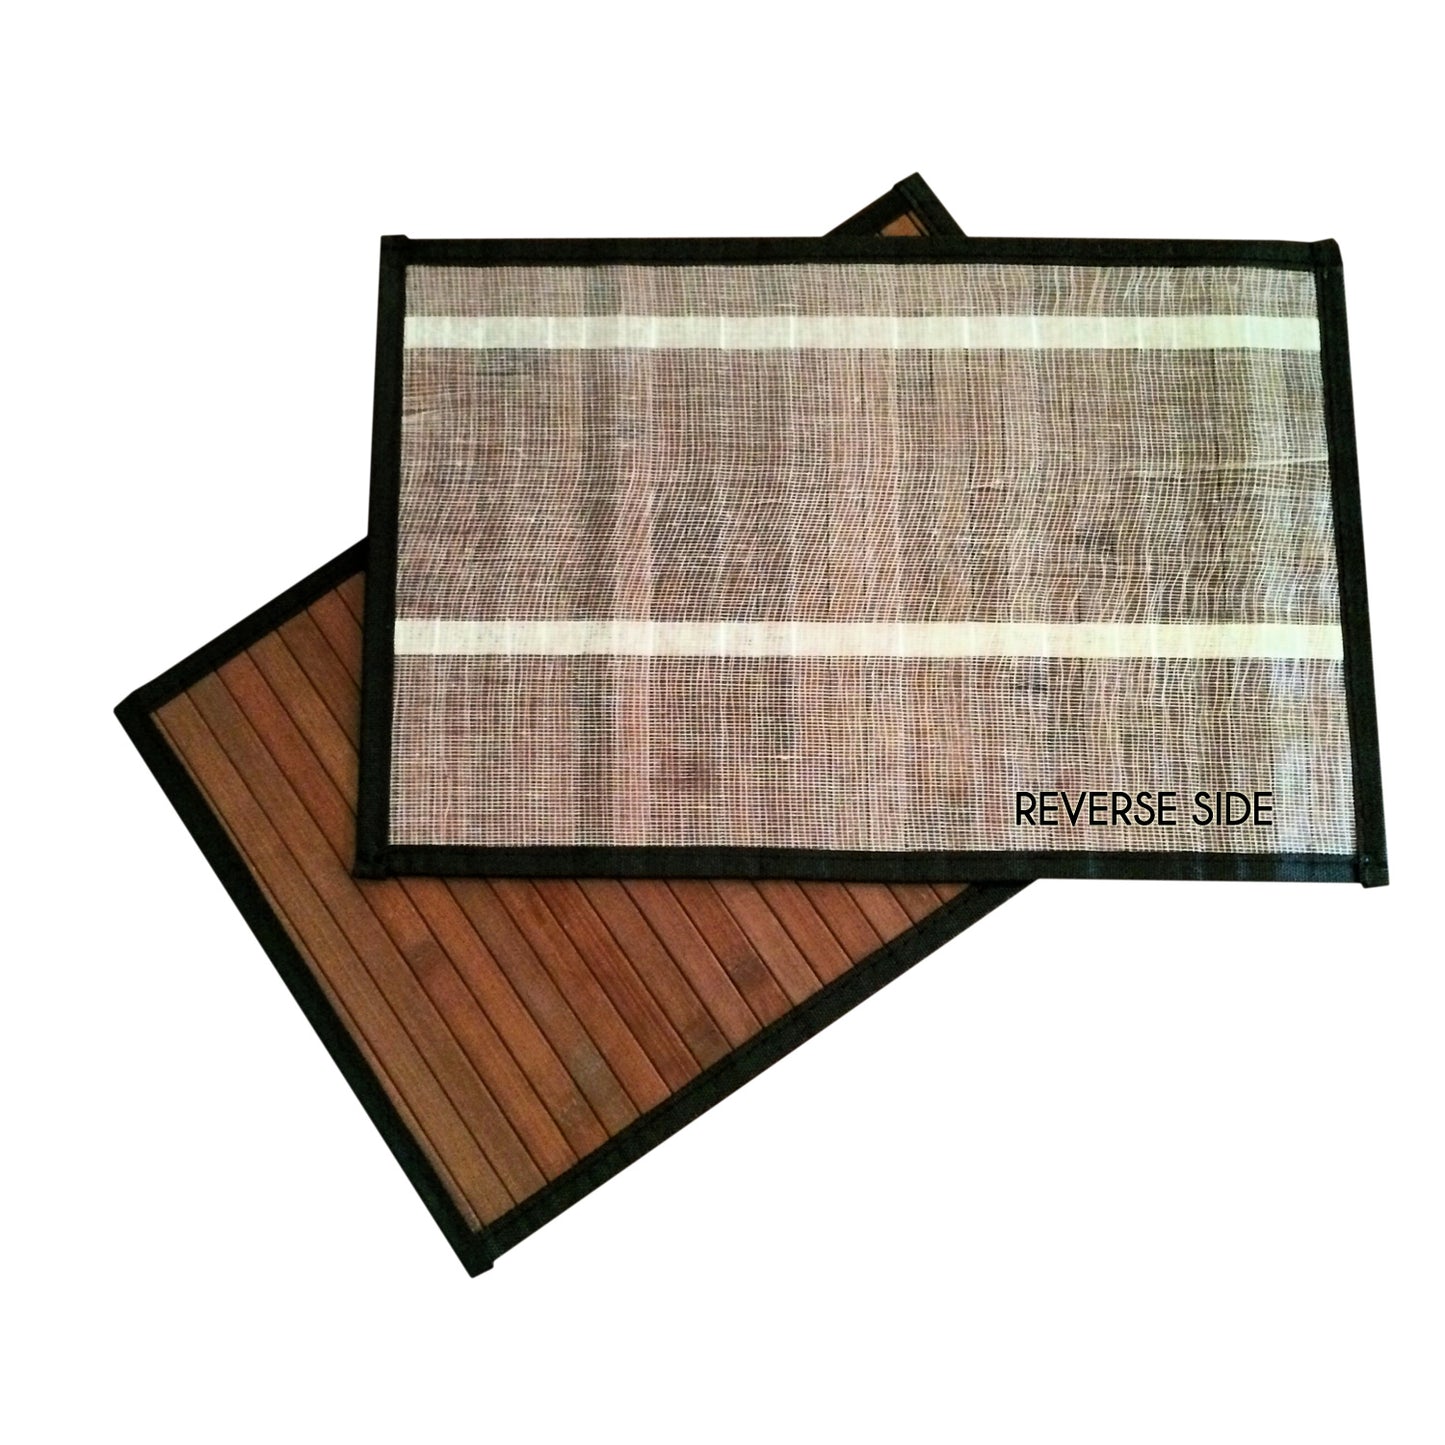 Bamboo Placemat - Dark Brown - Black Border, 4pc Set by Sustainable Simplicity